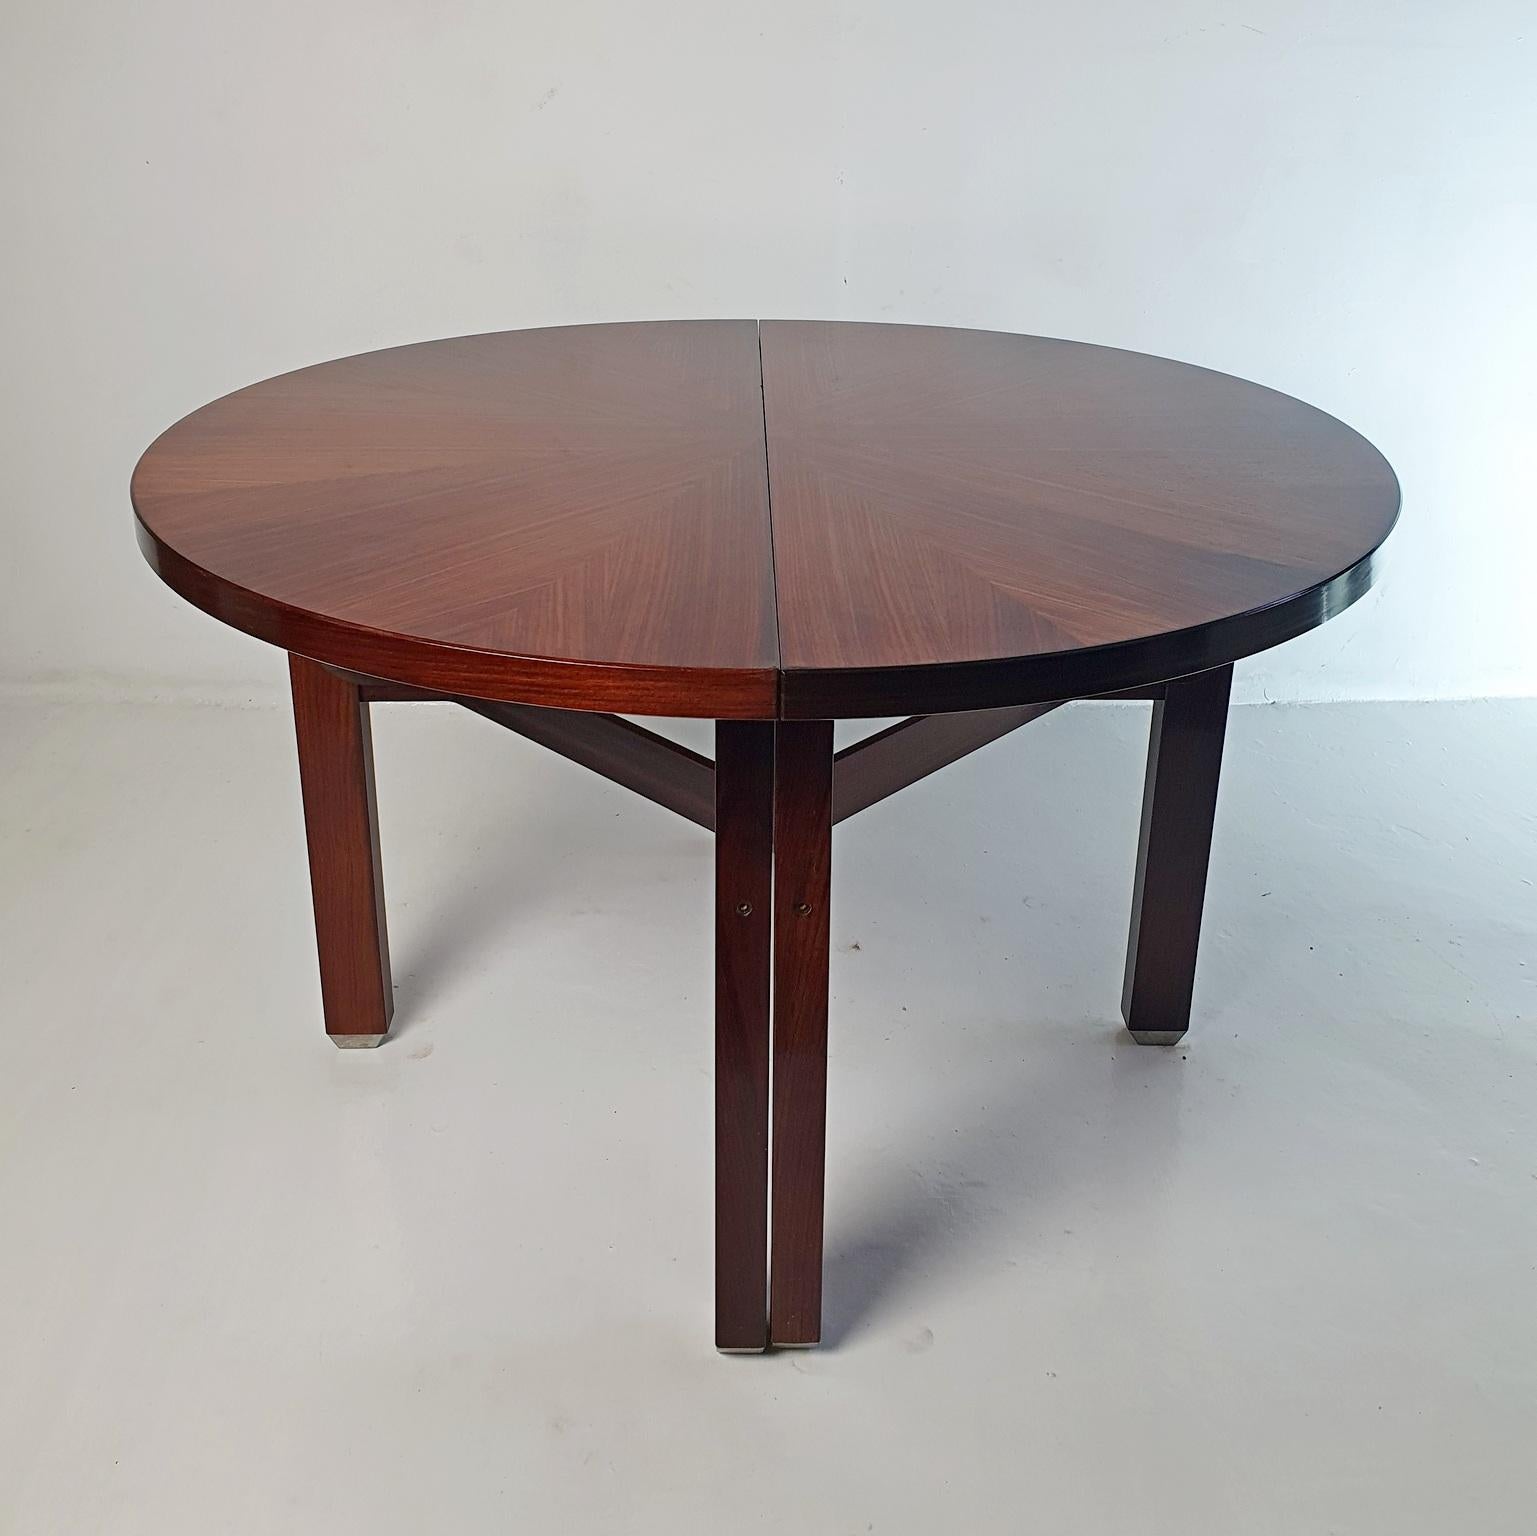 Walnut Mid-Century Modern Round Extendable Dining Table by Ico Parisi for Mim Italy For Sale